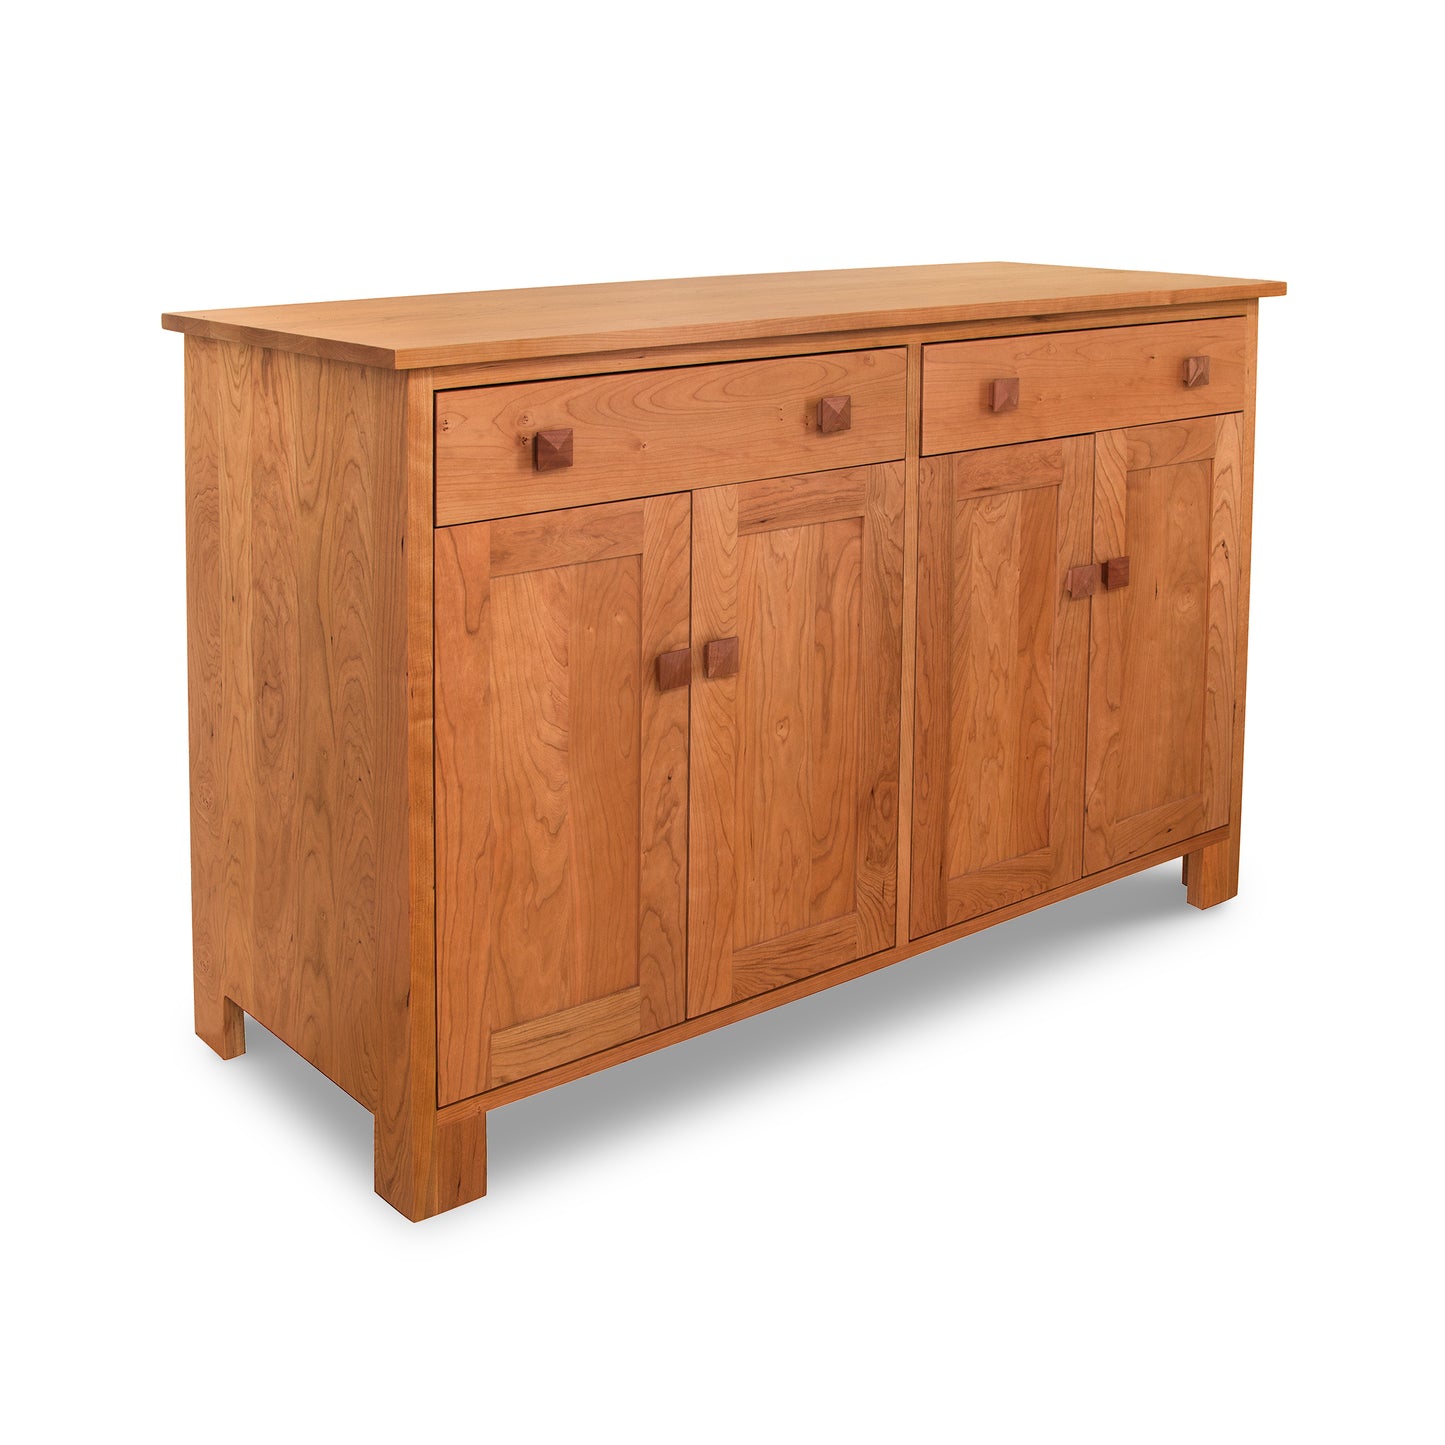 A Modern Mission Buffet by Lyndon Furniture with two doors and two drawers.